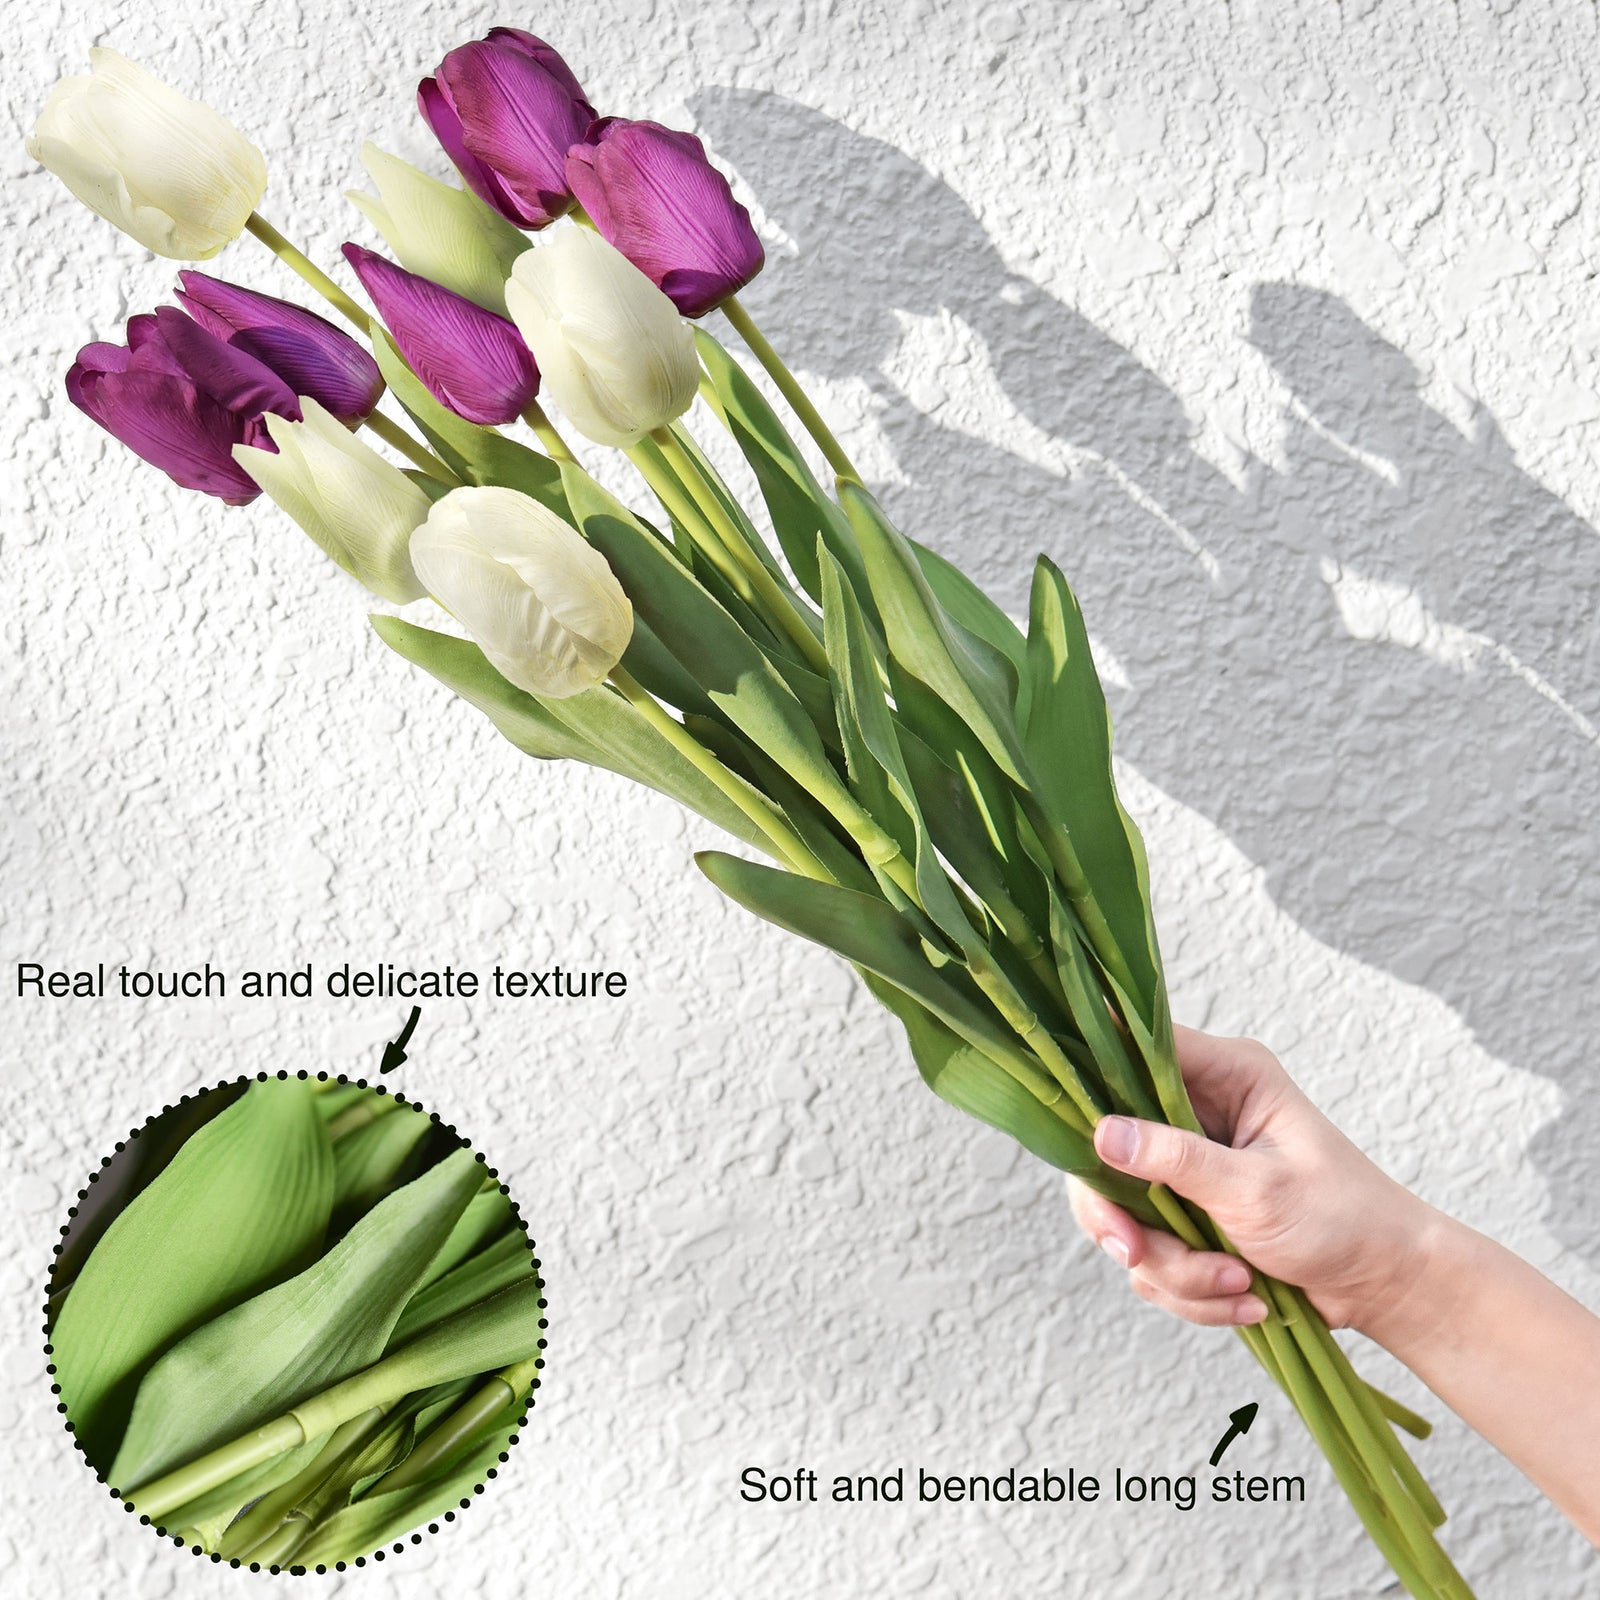 FiveSeasonStuff 10 Stems of (White & Purple) Soft and Long Stem Real Touch Tulip Artificial Flowers Bouquet, Wedding, Bridal, Home Decor (Dreamy Innocence)